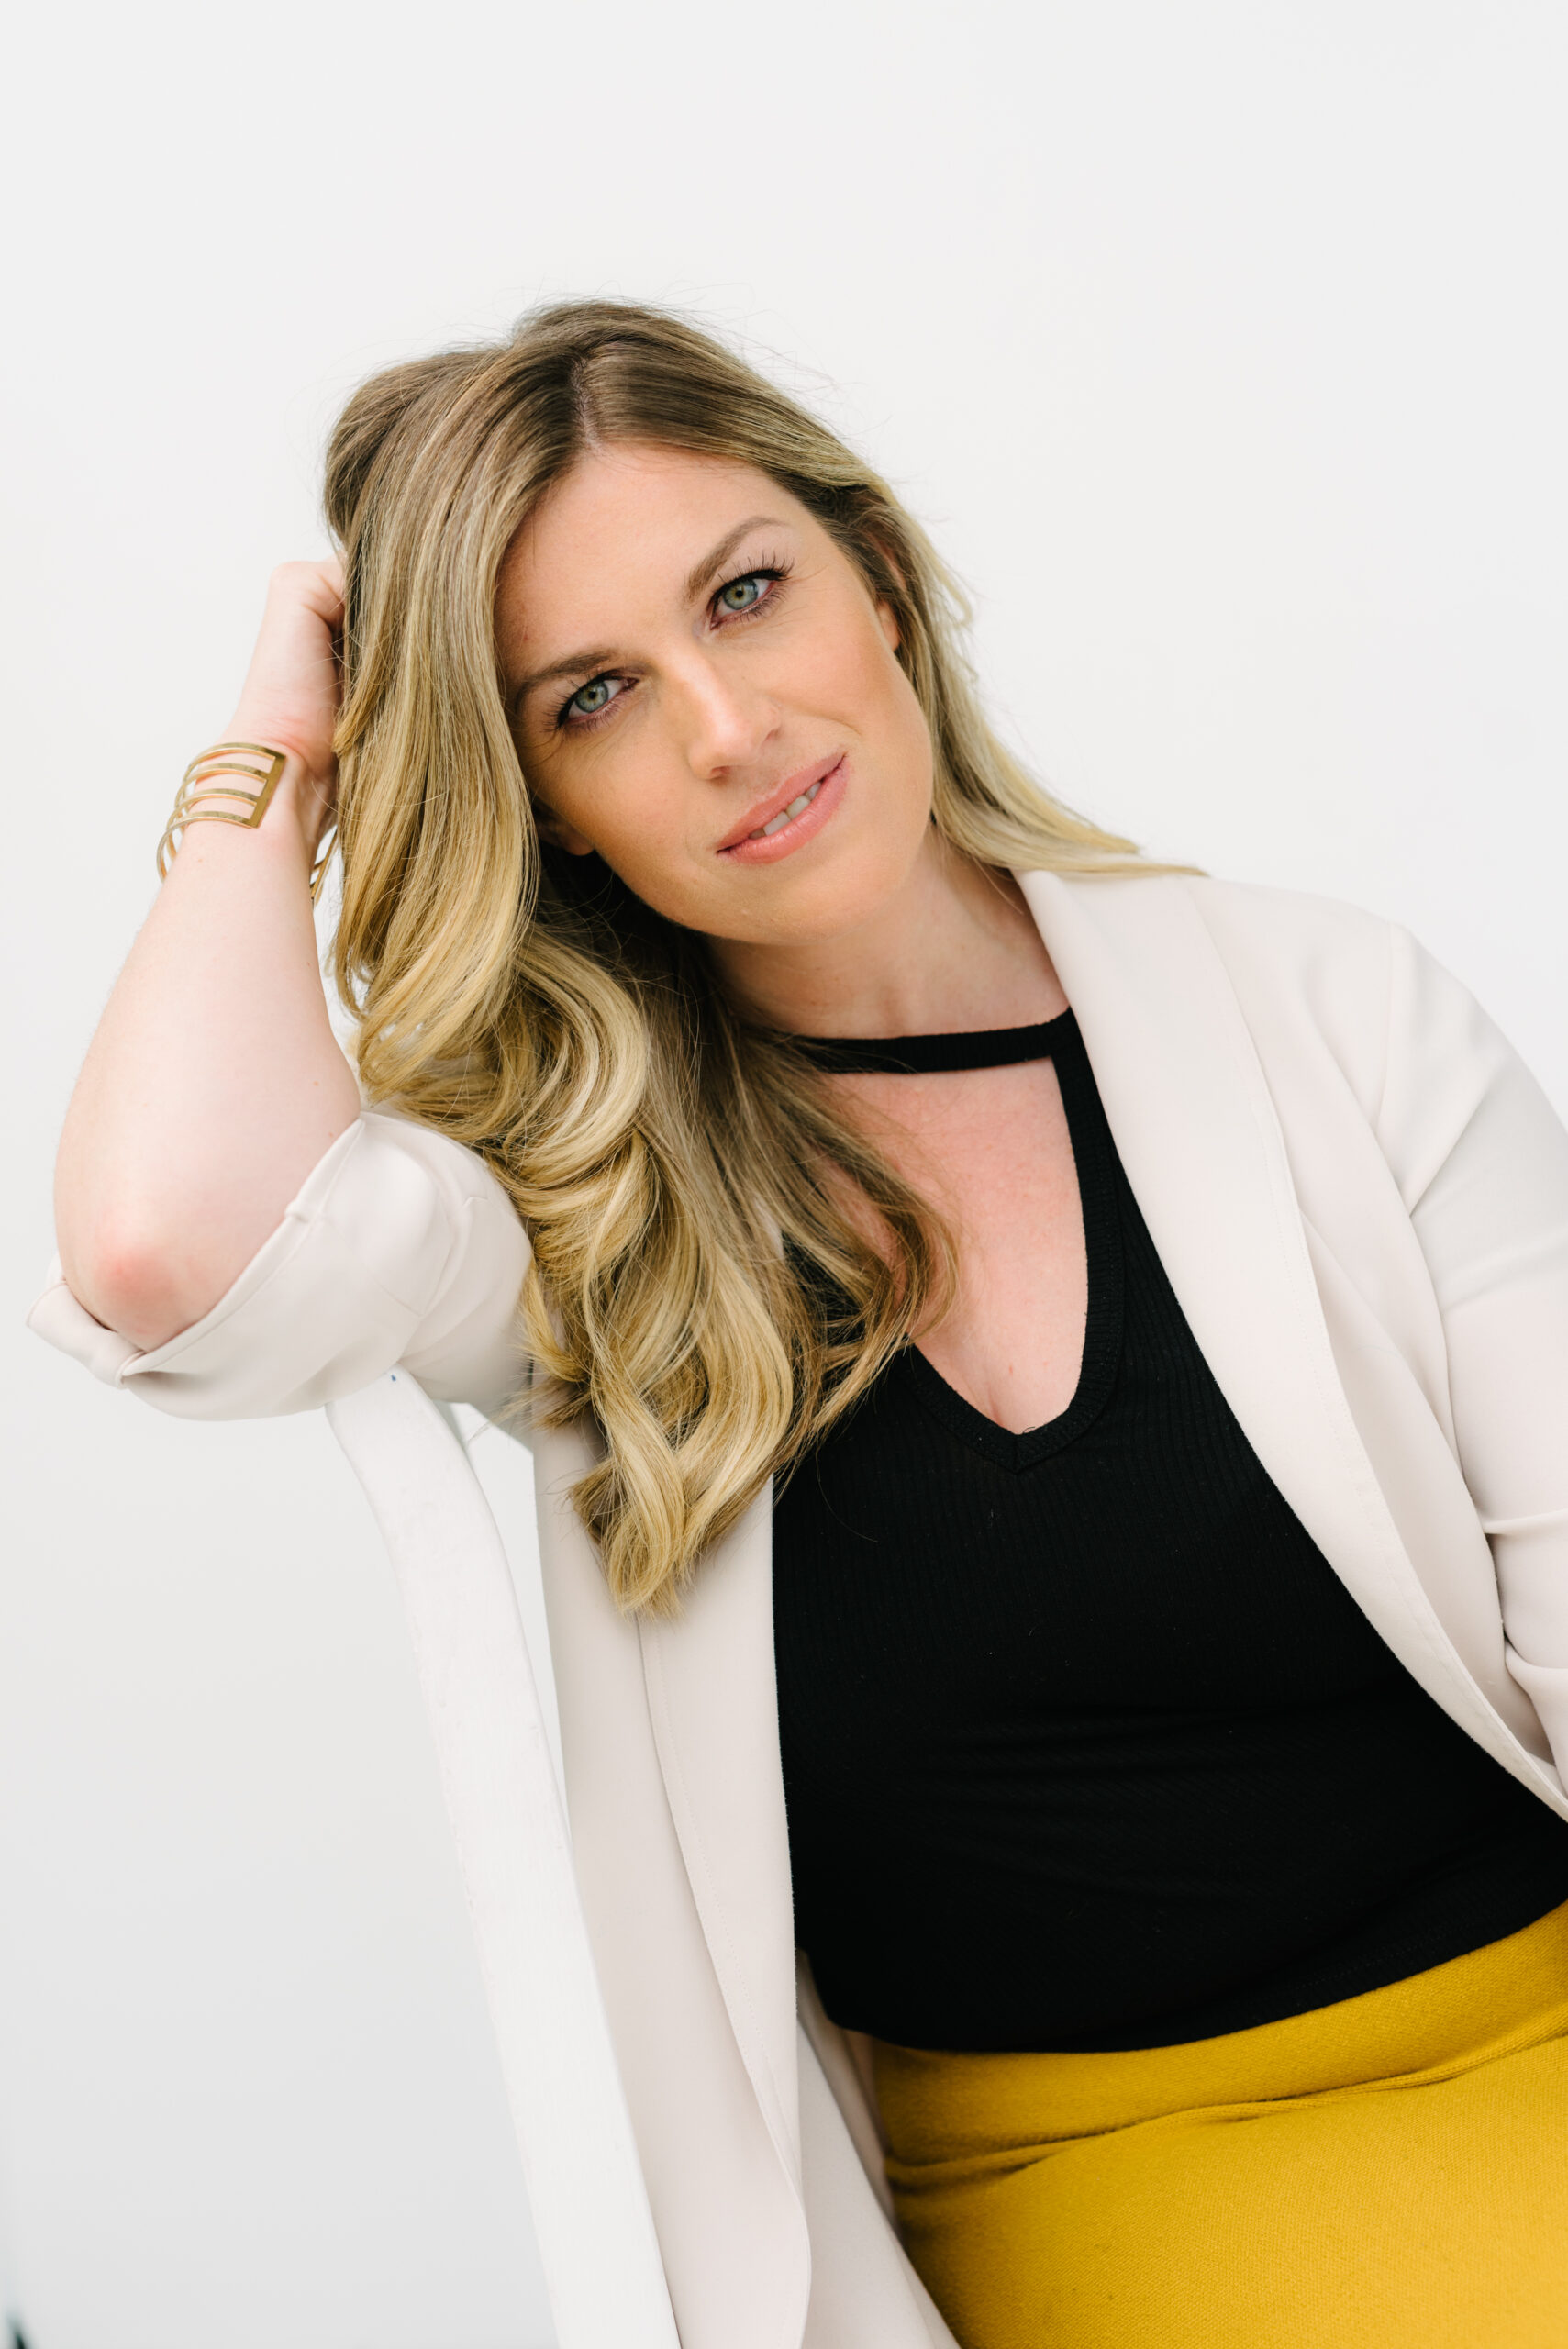 Knix founder Joanna Griffiths: 'The next legacy brands are being created in  real time